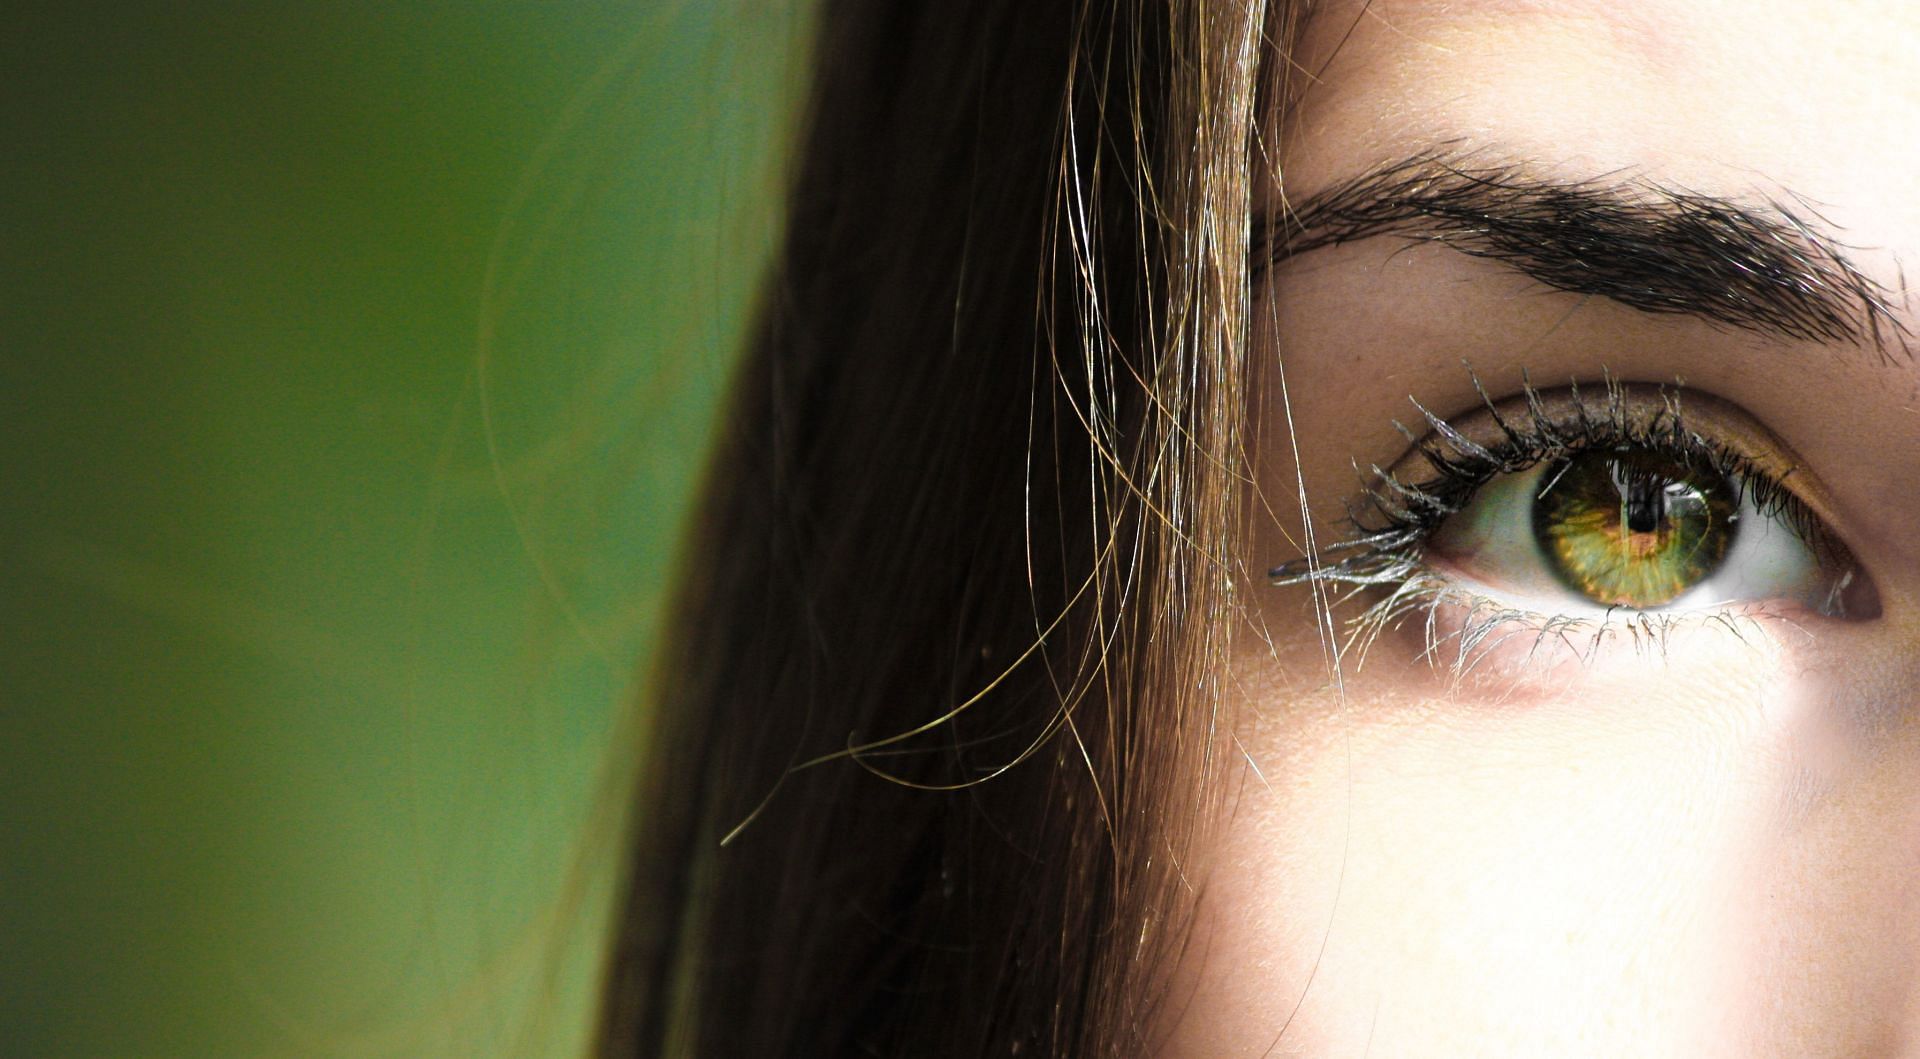 Keep your eyes as healthy as possible and guard against vision loss in later life. (Image via Pexels/ Jan Krnc)